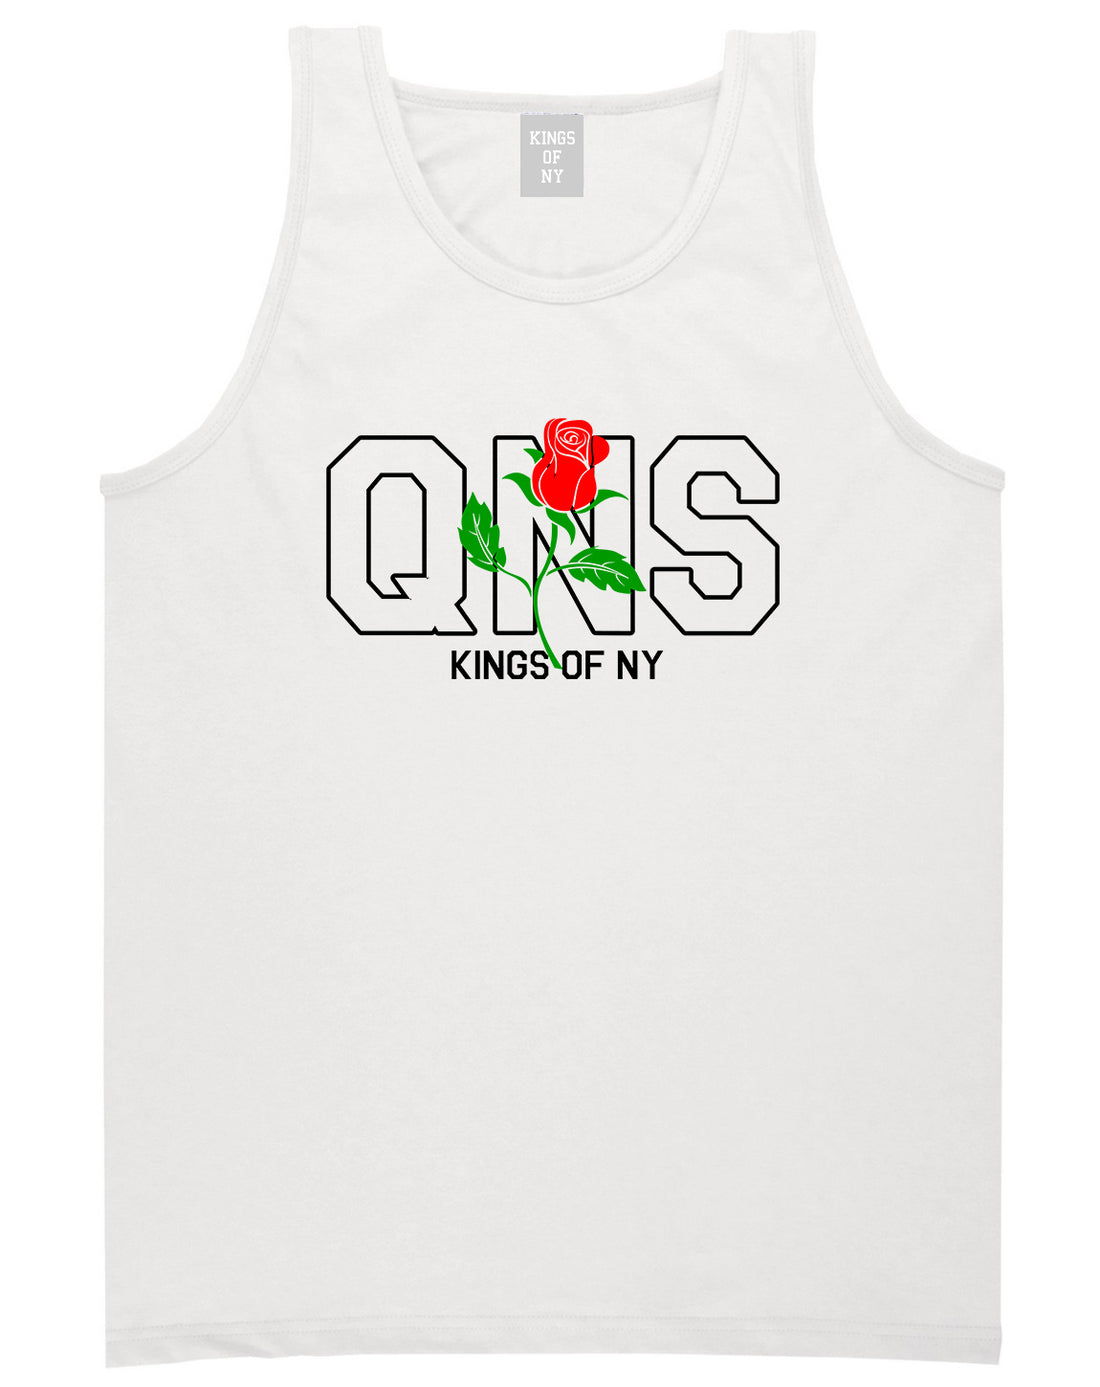 Rose QNS Queens Kings Of NY Mens Tank Top T-Shirt White